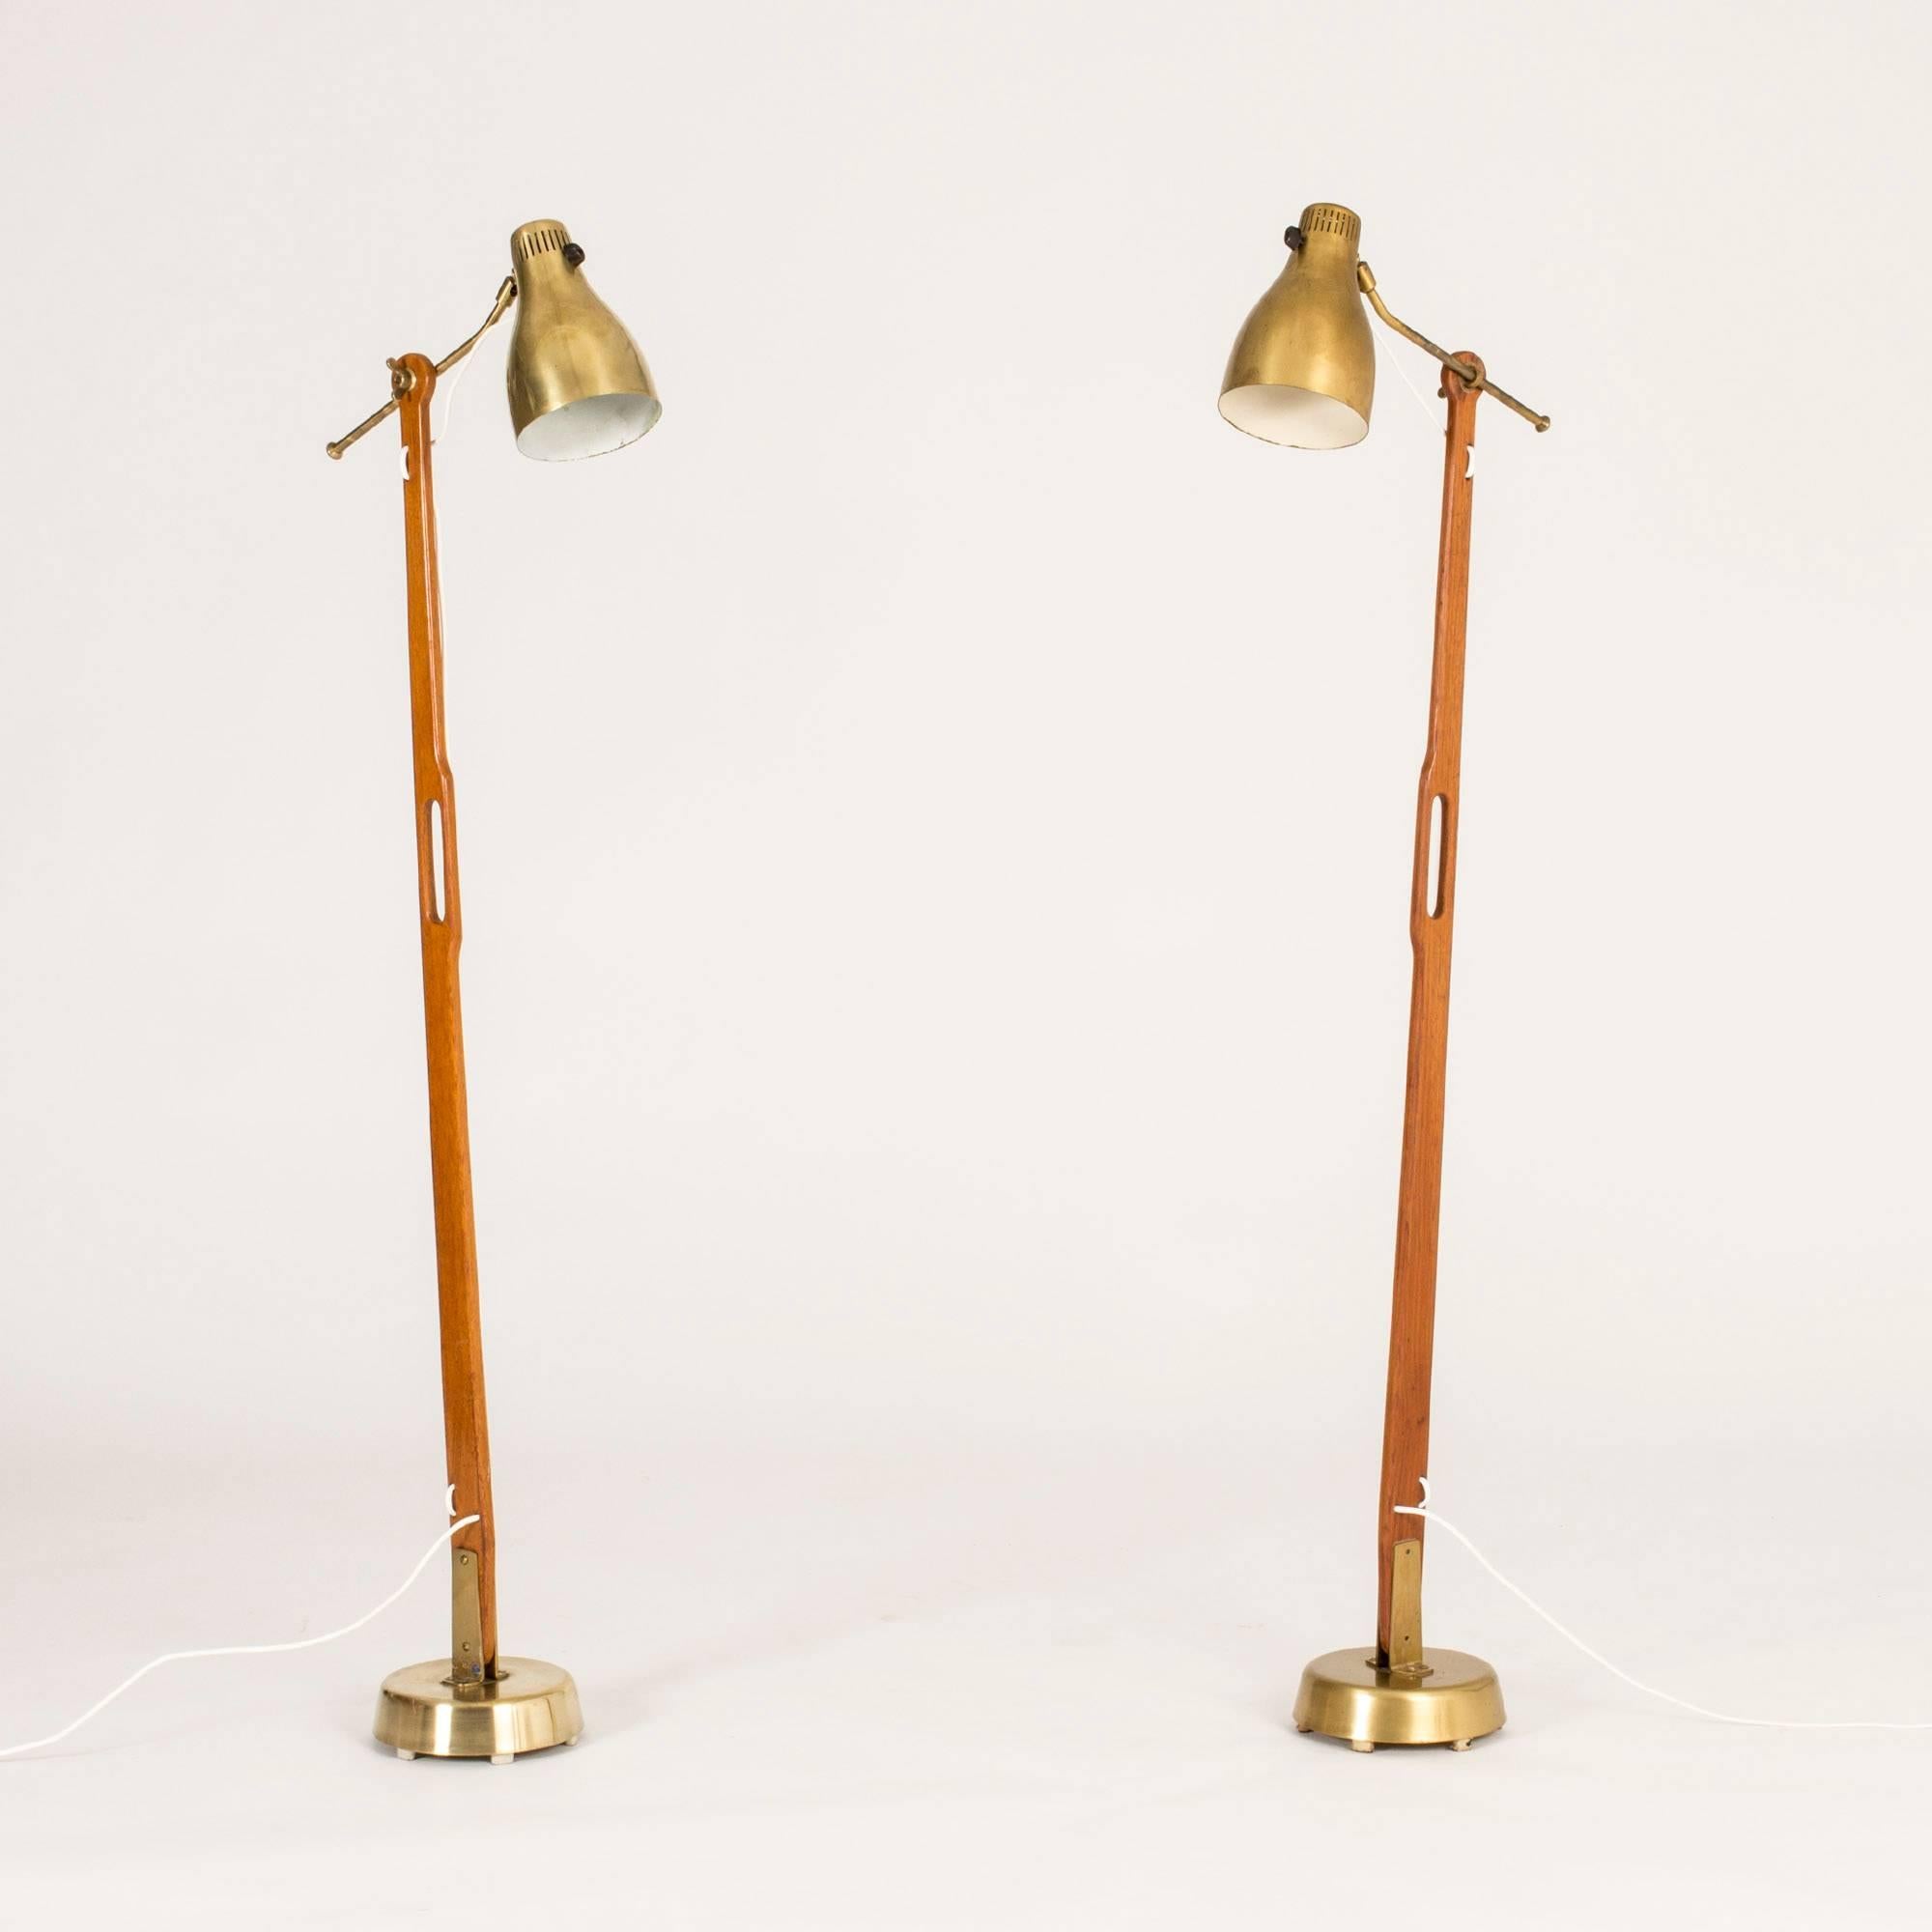 Pair of amazing teak and brass floor lamps by Hans Bergström, with wonderful attention to detail and functionality. The lamp shades can be adjusted in different angles and at different distances from the pole. Handles crafted in the teak, making the